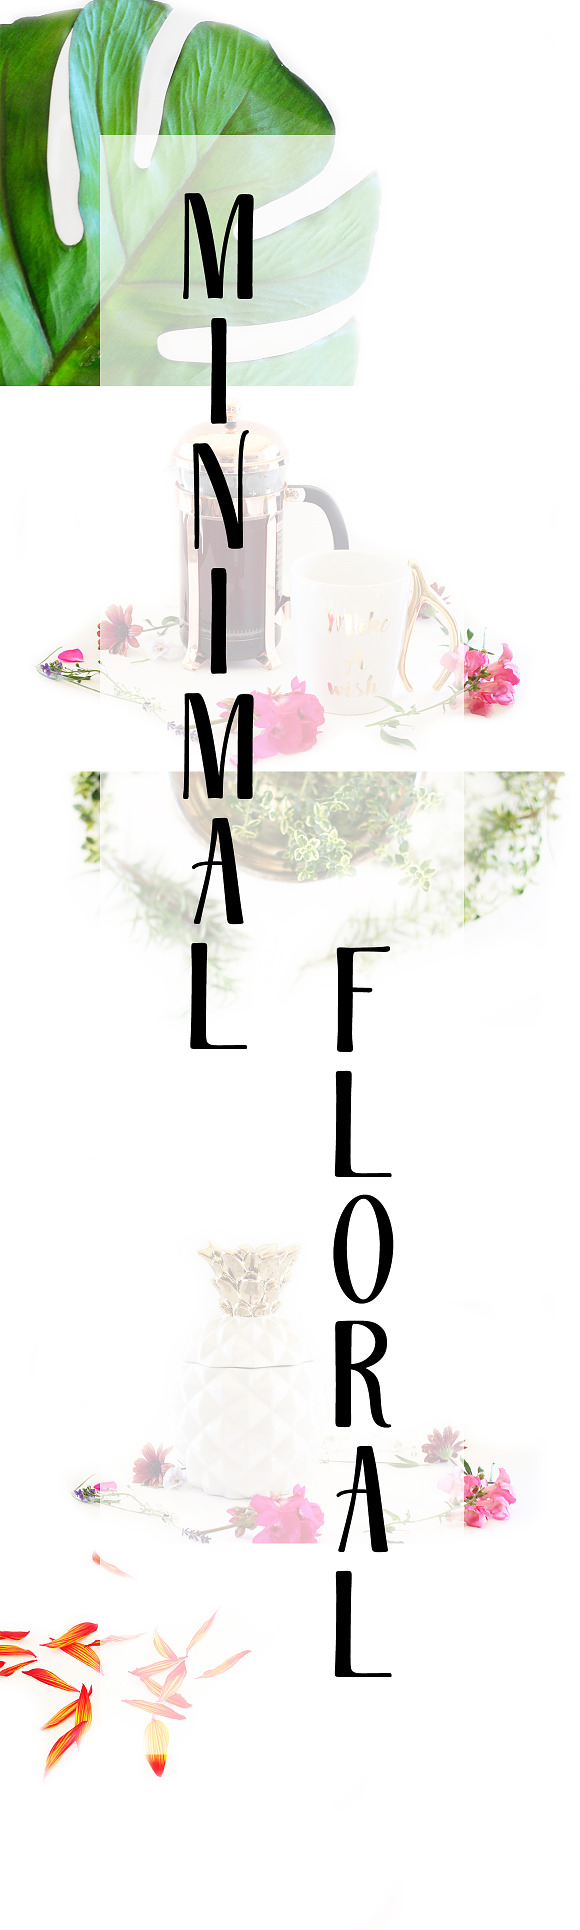 Minimal Floral Story Stock Photo in Instagram Templates - product preview 1